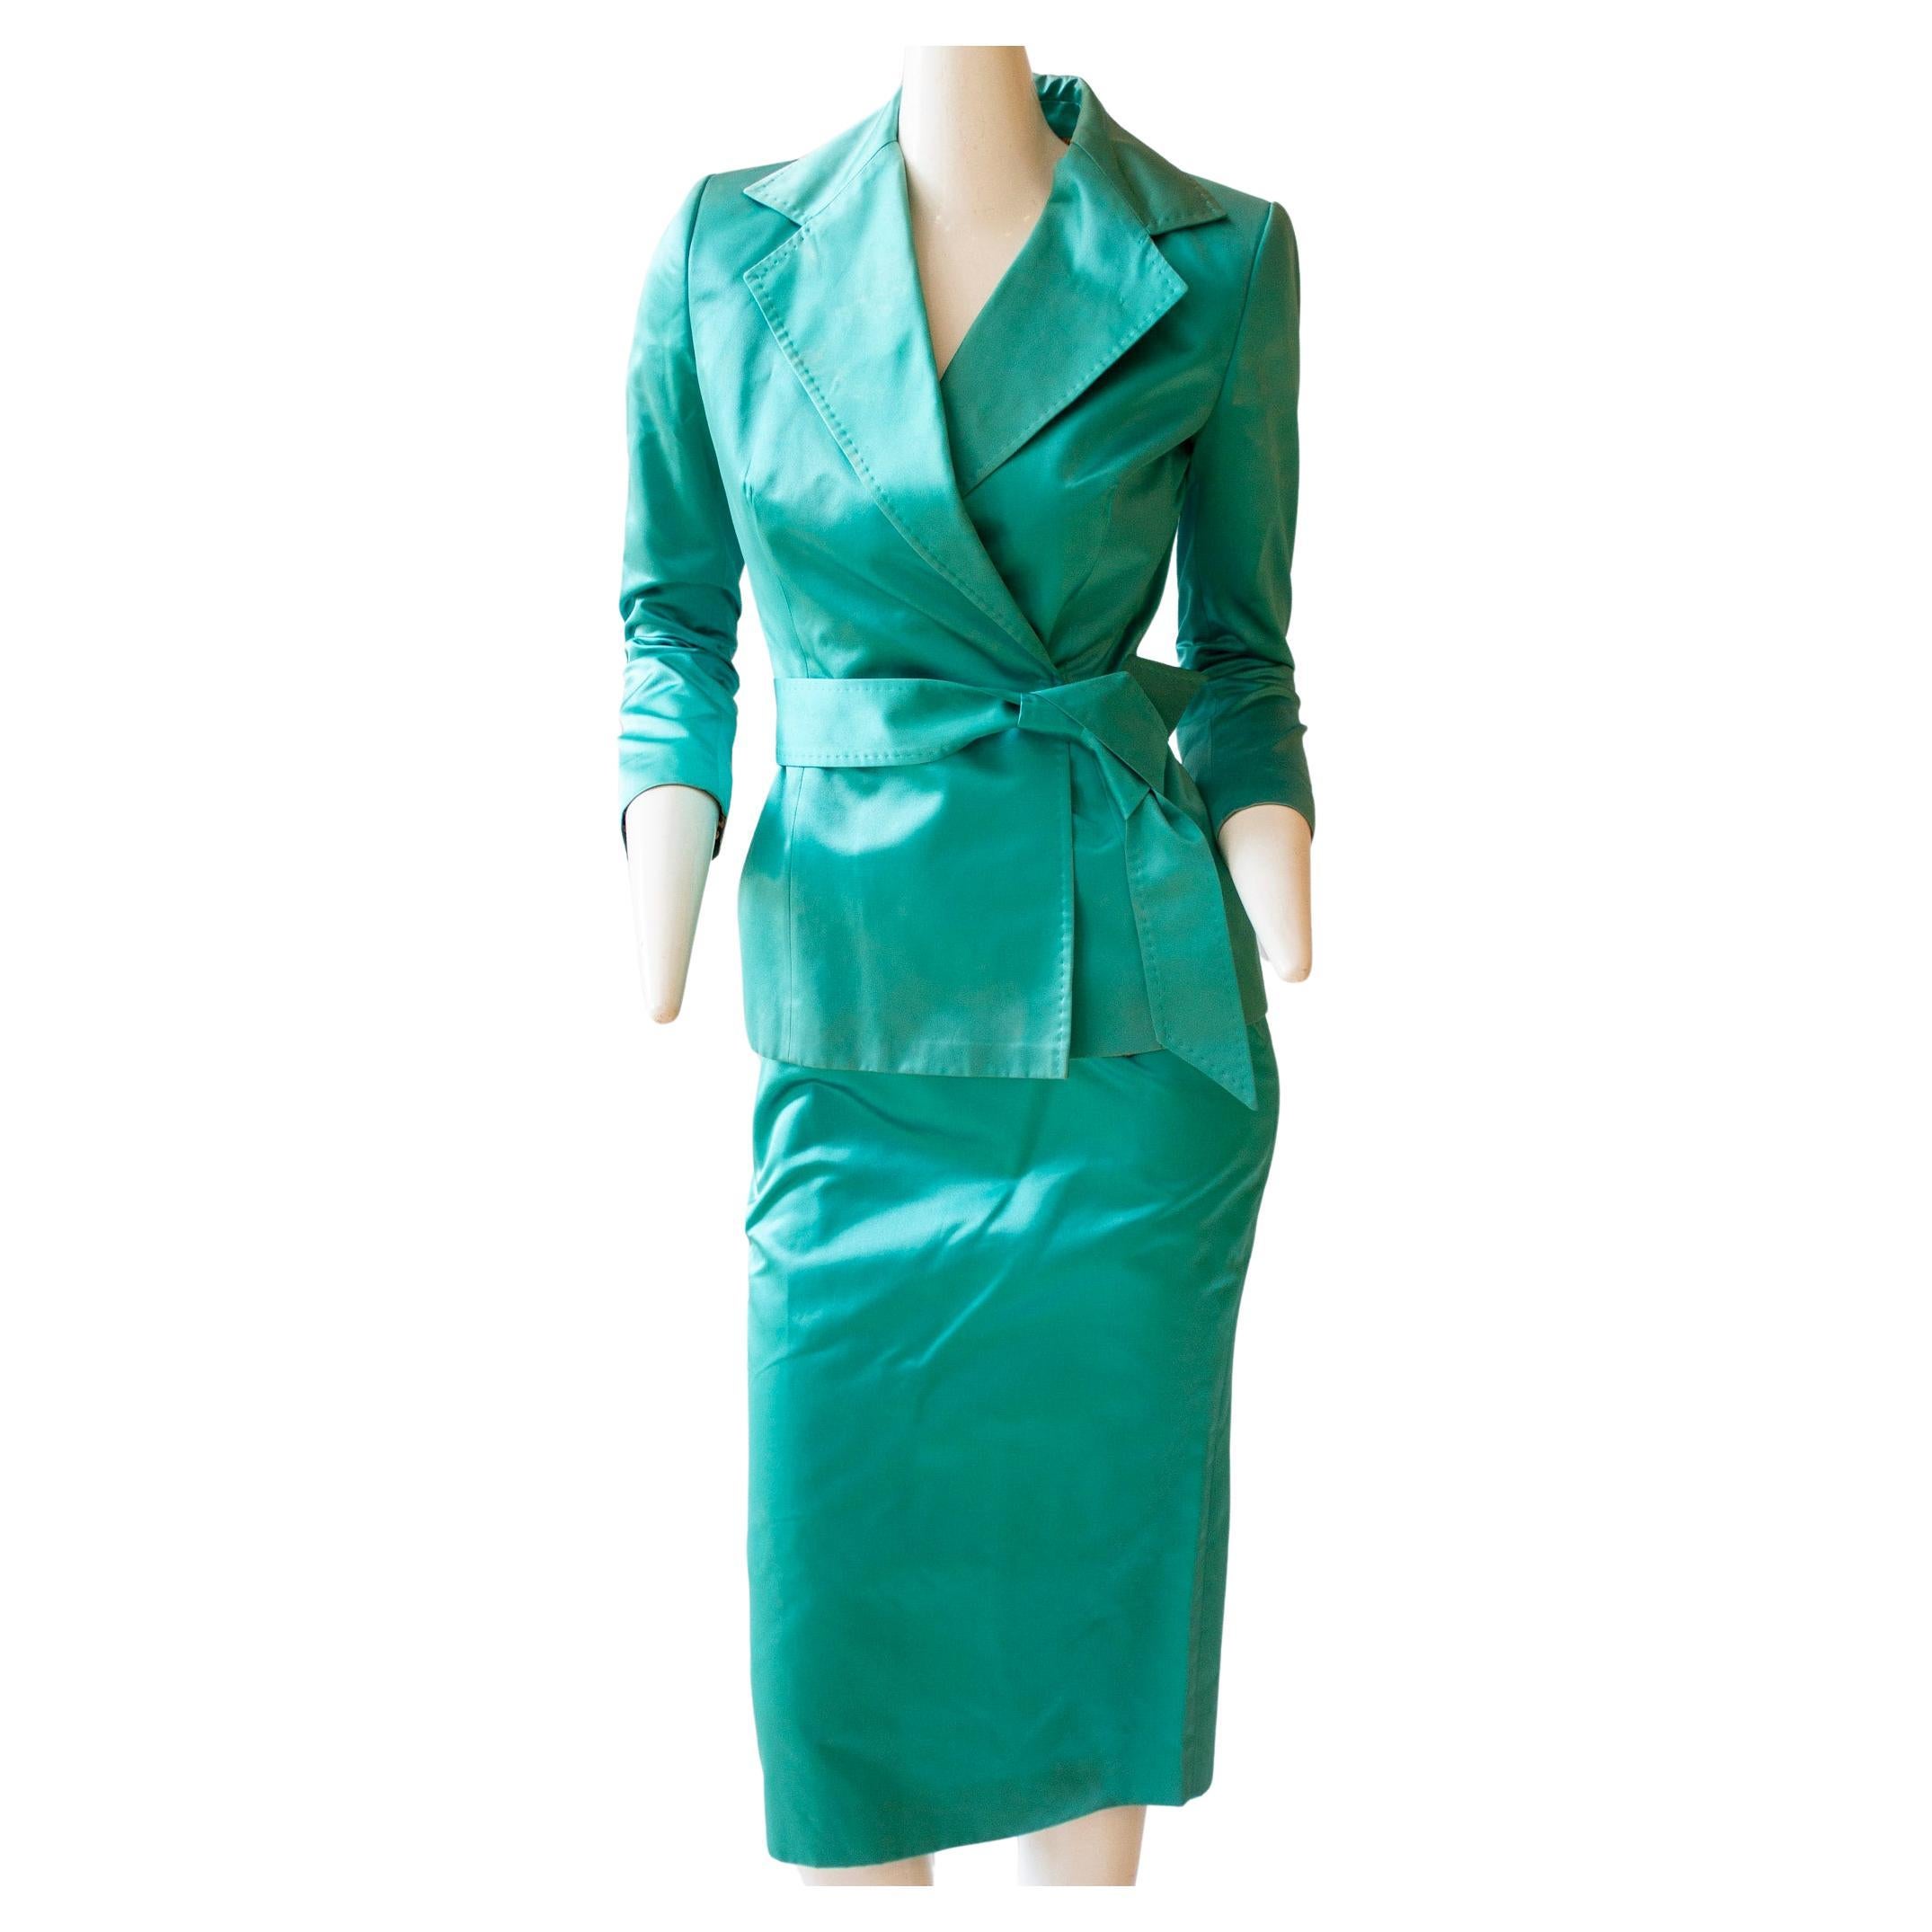 Dolce & Gabbana, Two Piece 100% Silk Turquoise Skirt Suit Ensemble  For Sale